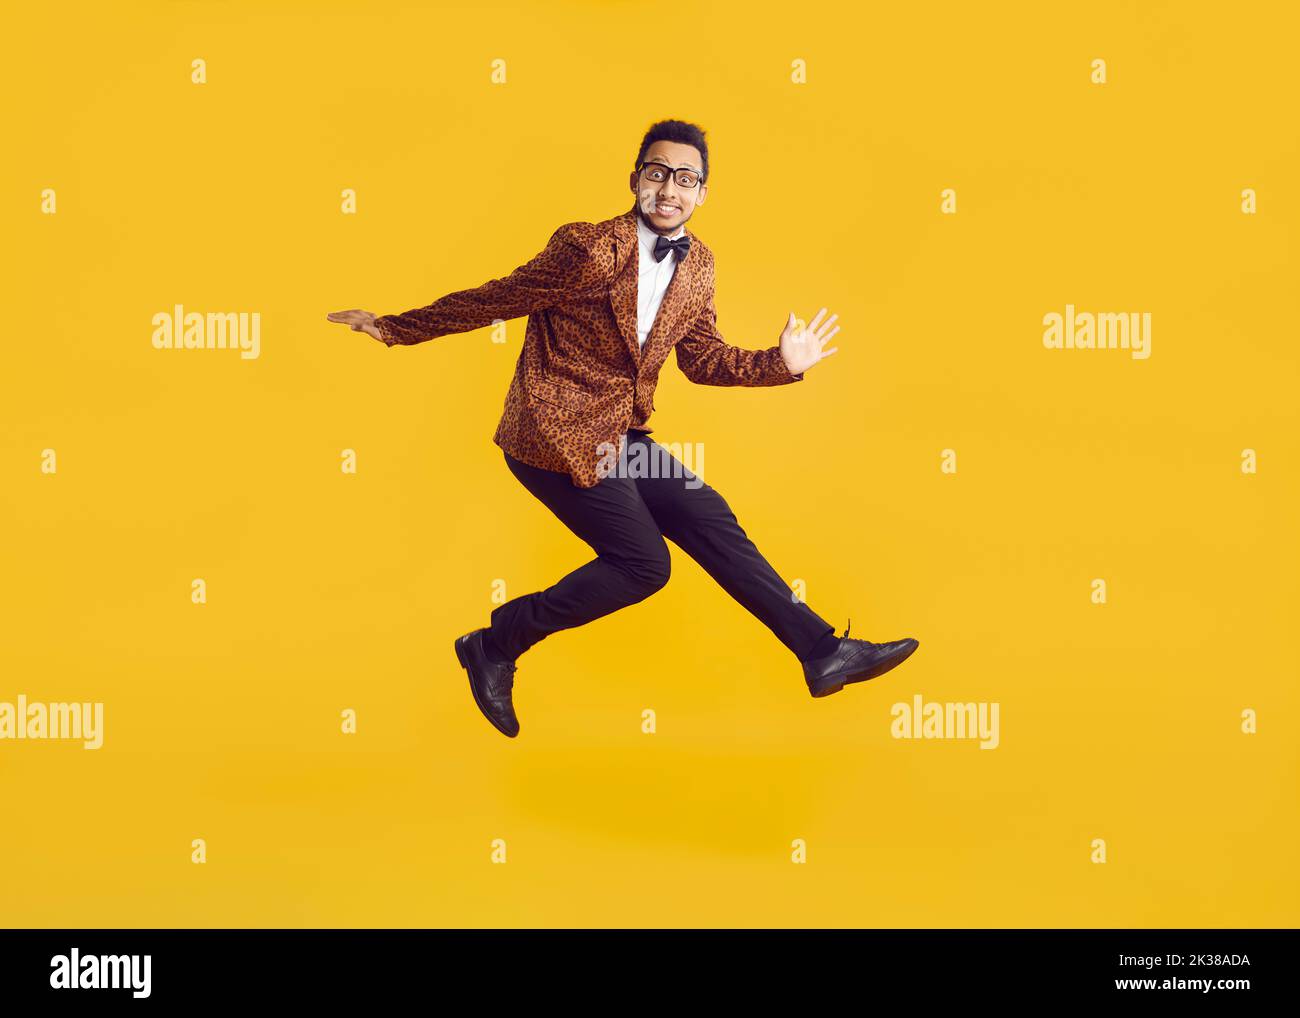 Cheerful funny dark-skinned young man in leopard jacket having fun jumping on yellow background. Stock Photo